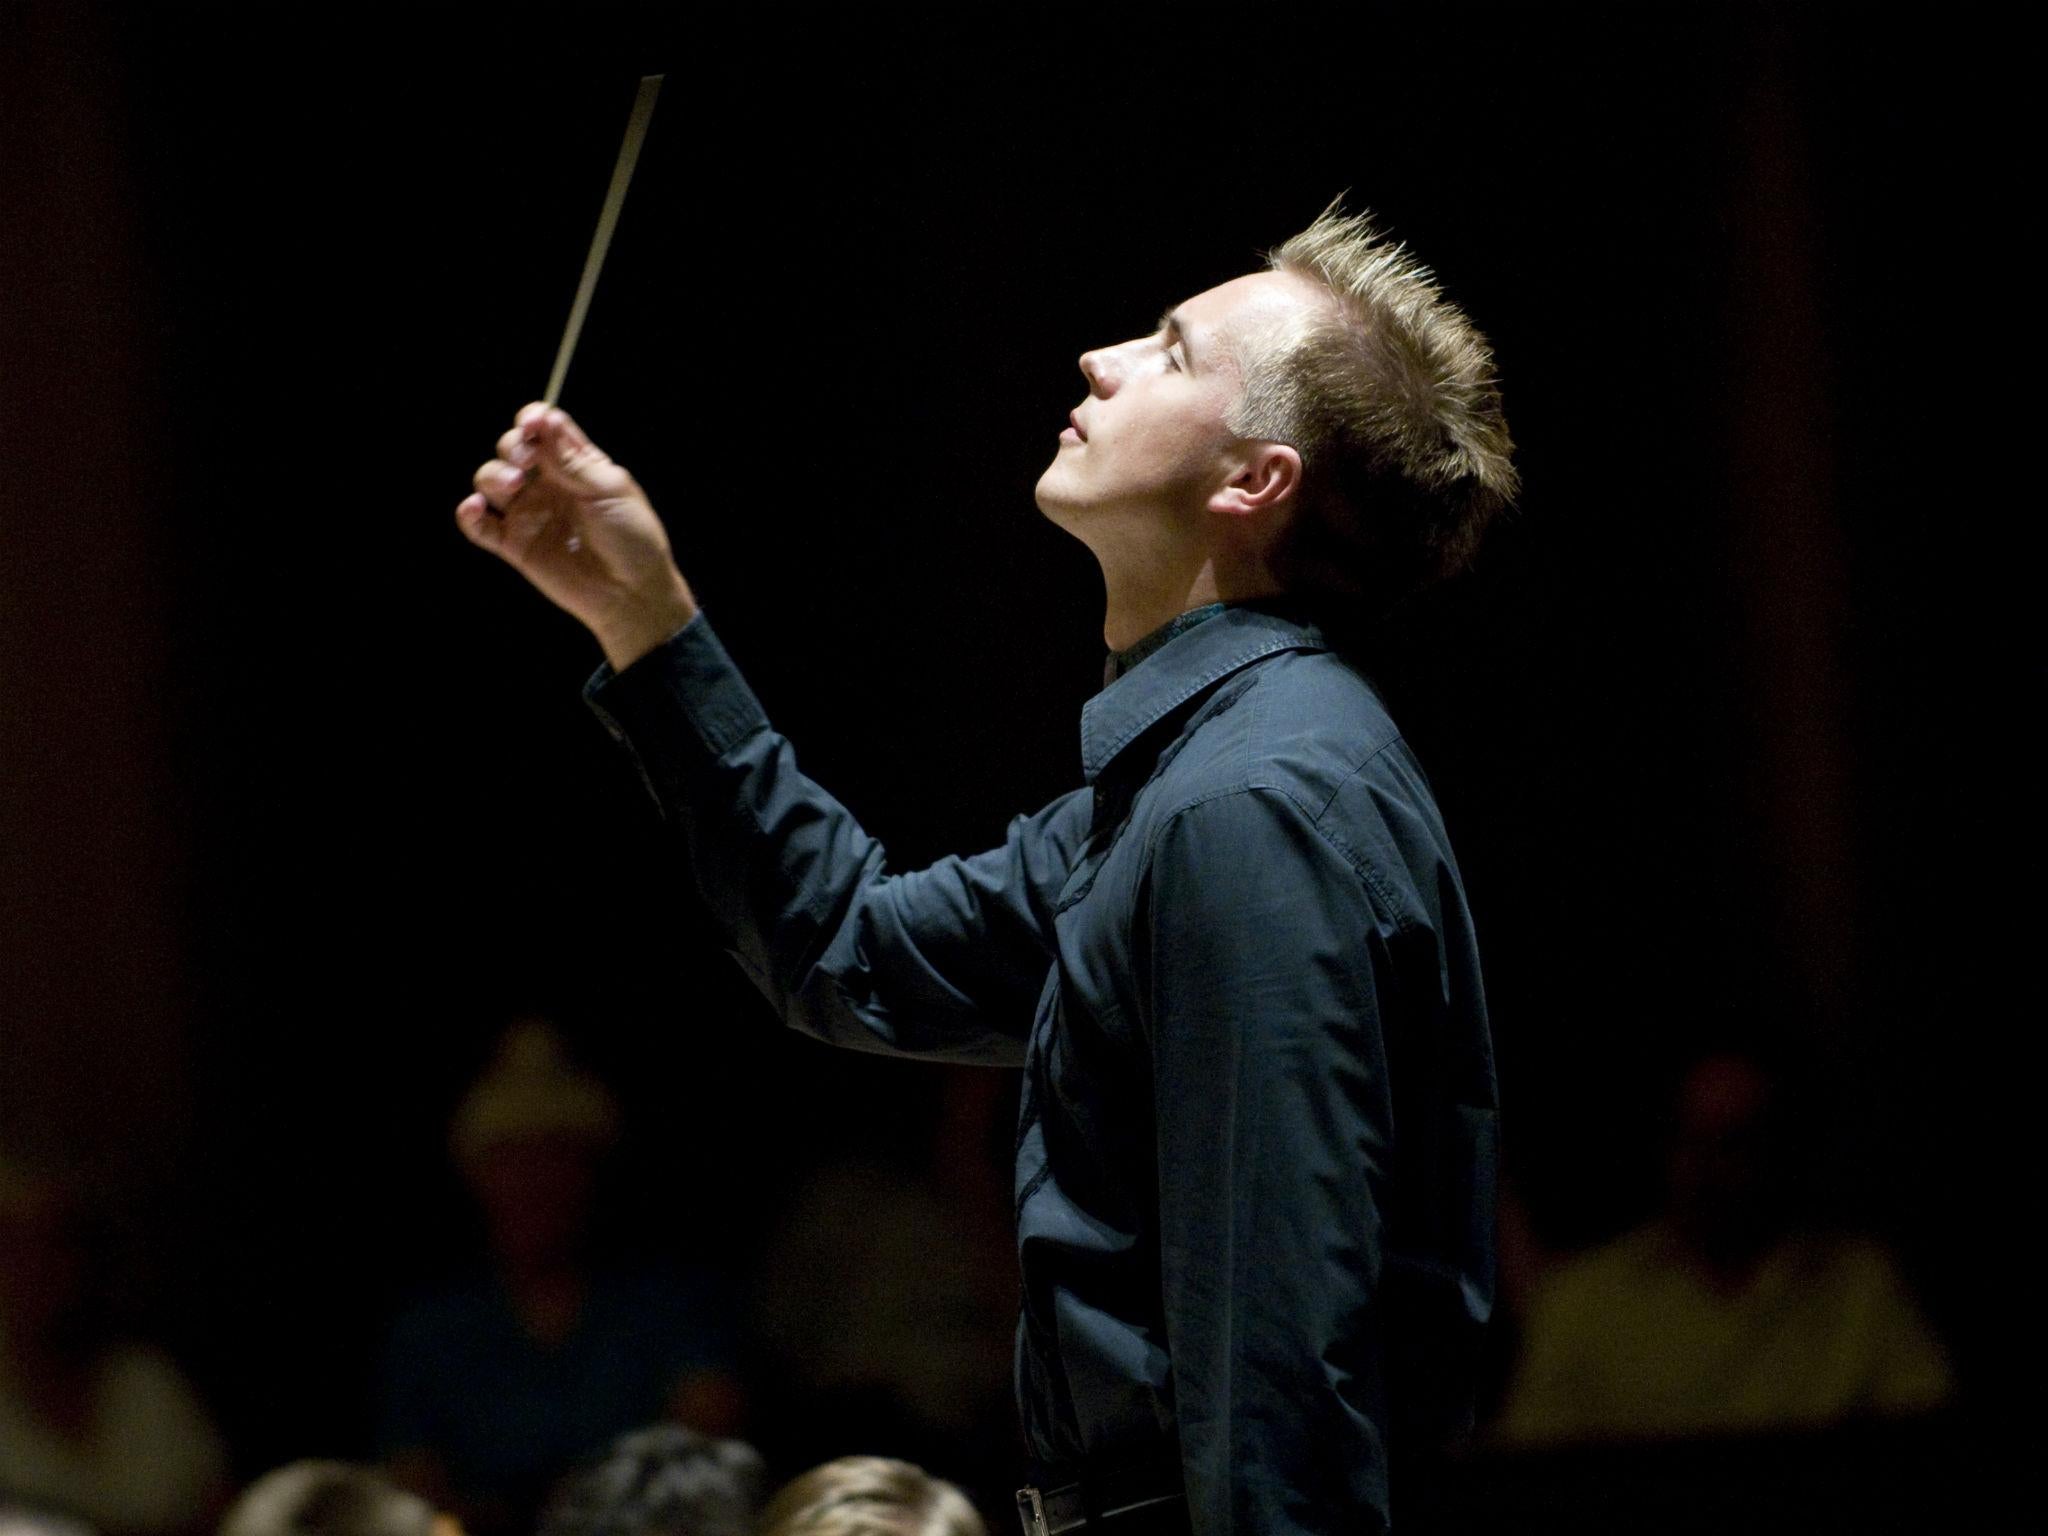 Prom 60: Vasily Petrenko conducts the Oslo Philharmonic in an all-Russian programme